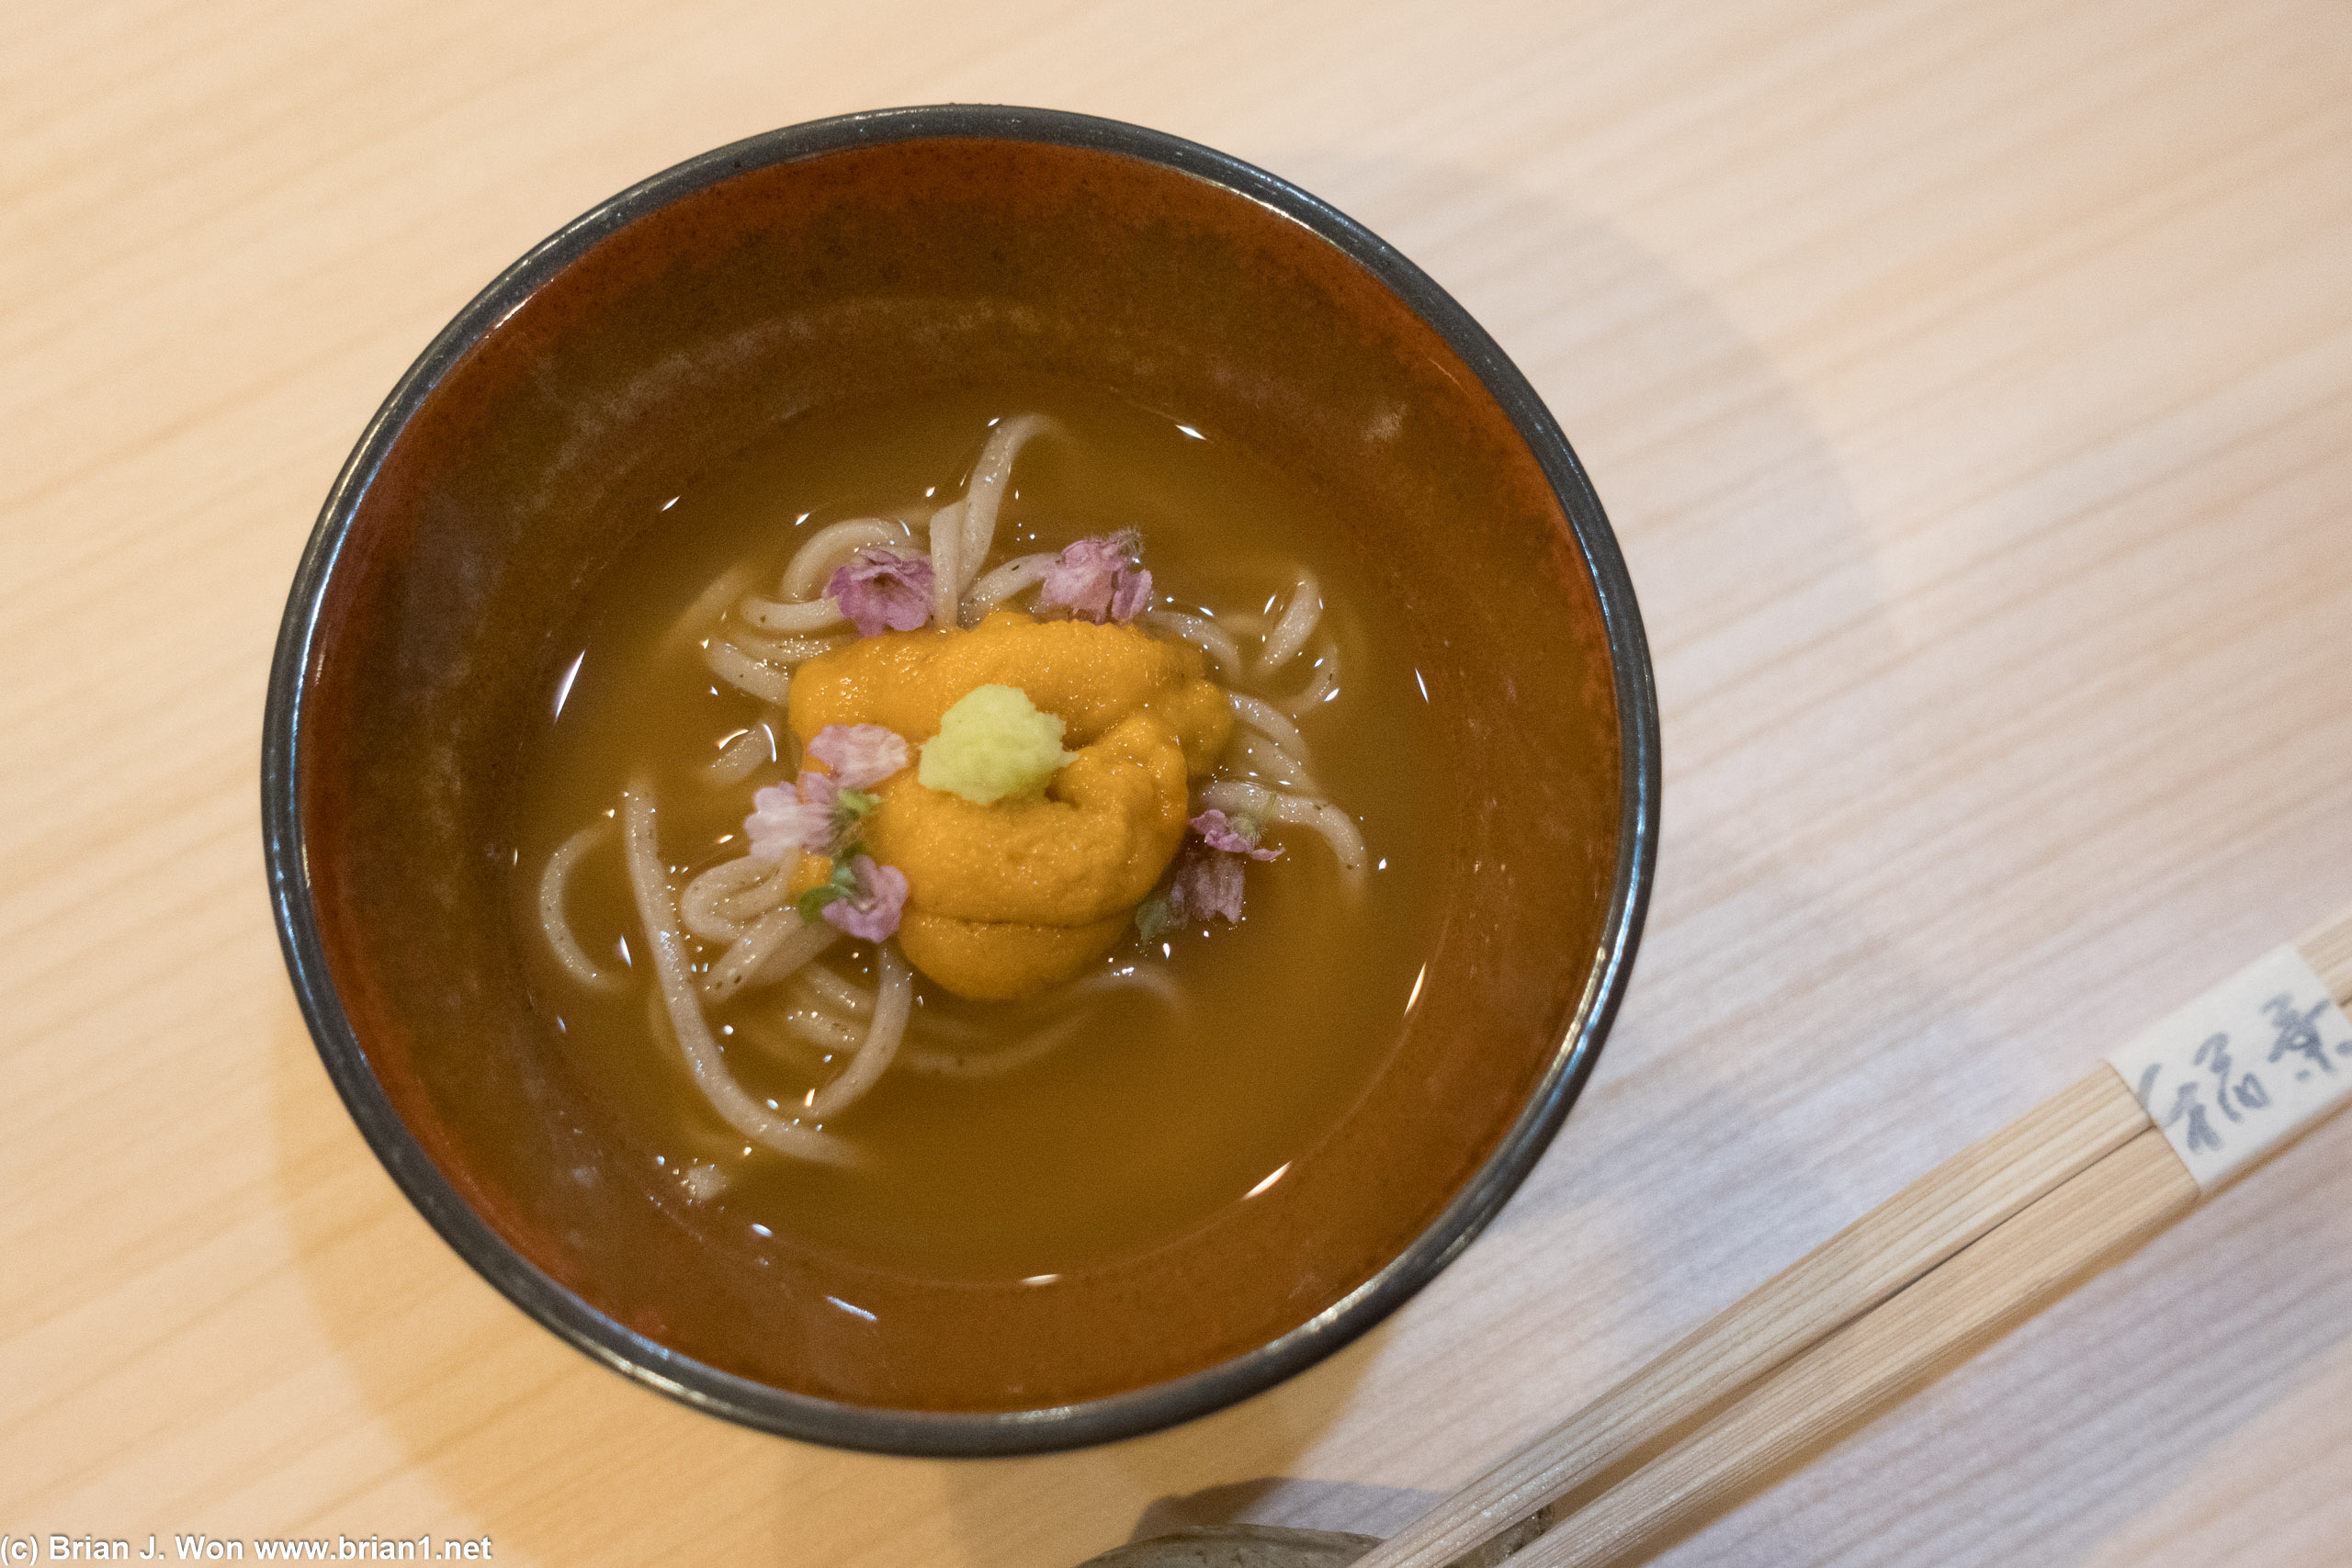 House-made cold soba and uni.